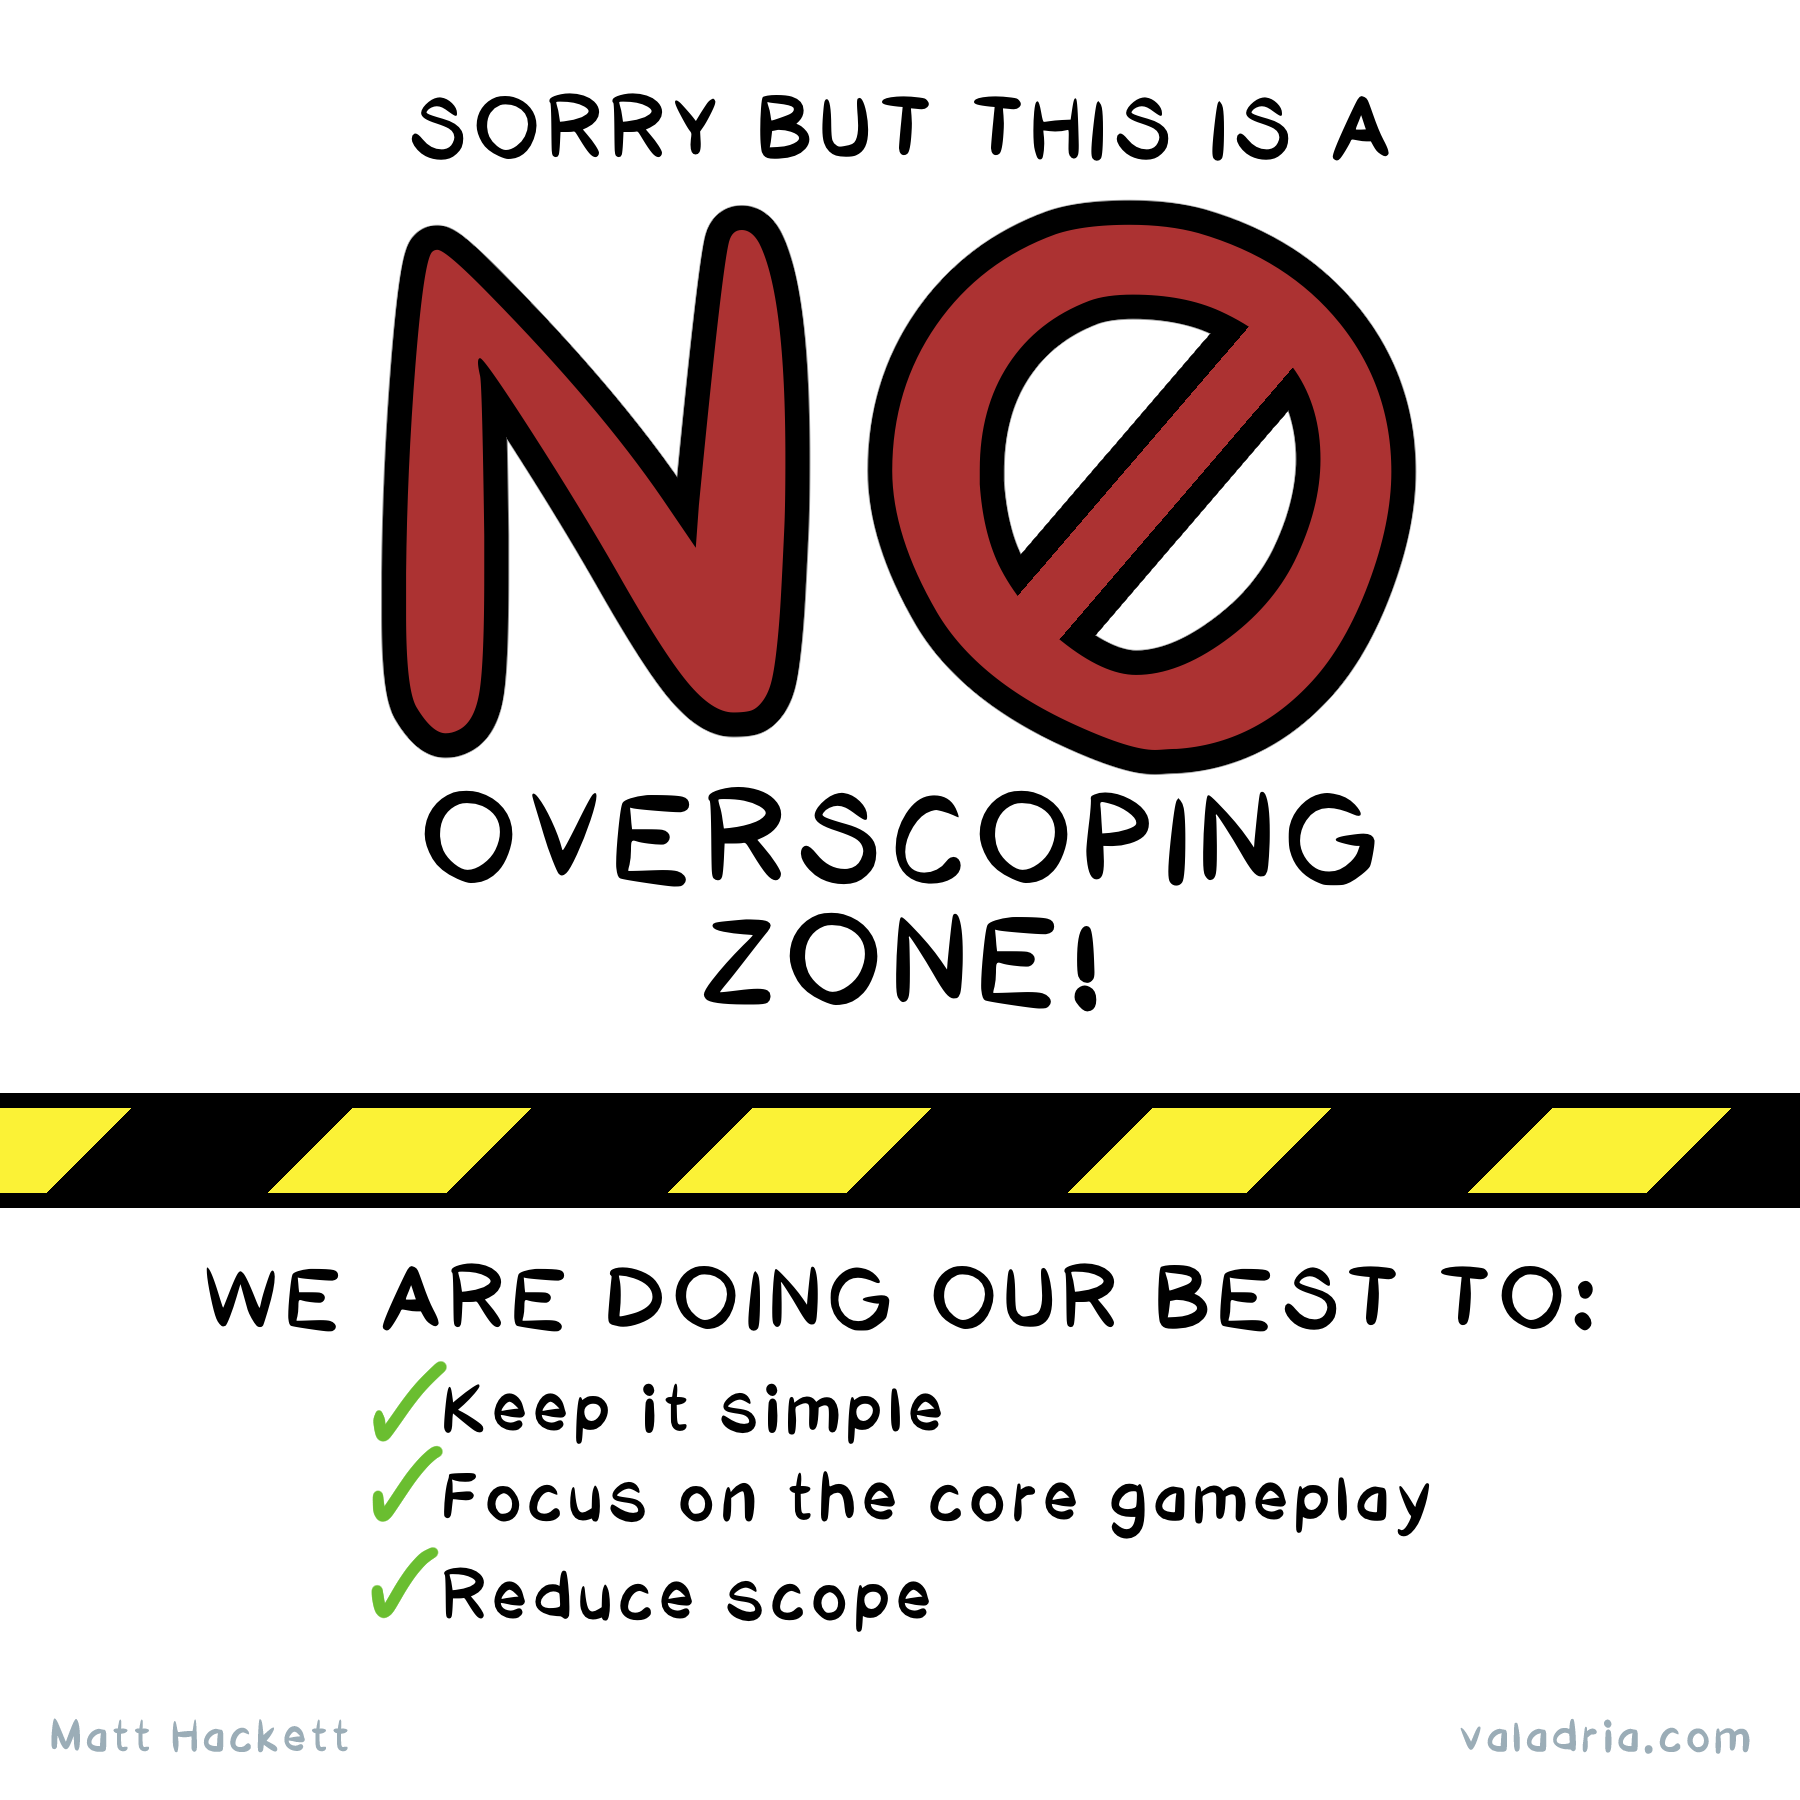 Sorry but this is a  NO overscoping zone! We are doing our best to: Keep it simple Focus on the core gameplay Reduce scope by Matt Hackett valadria.com